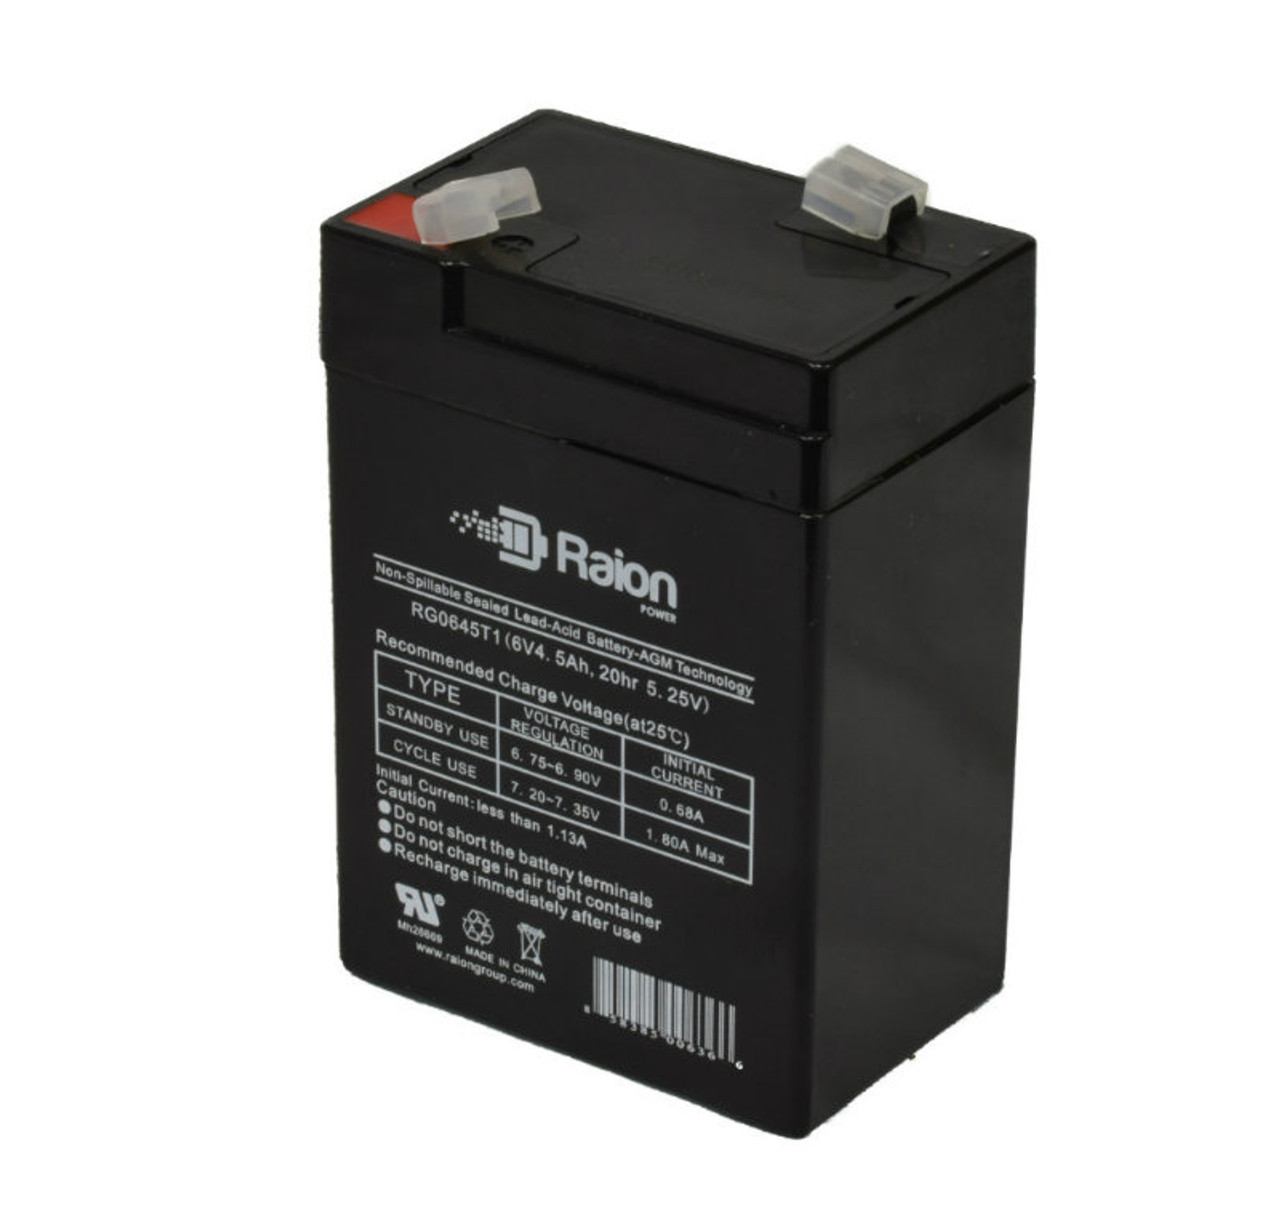 Raion Power RG0645T1 6V 4.5Ah Replacement Battery Cartridge for Peg Perego IGED1172 6V Fiat 500 Star